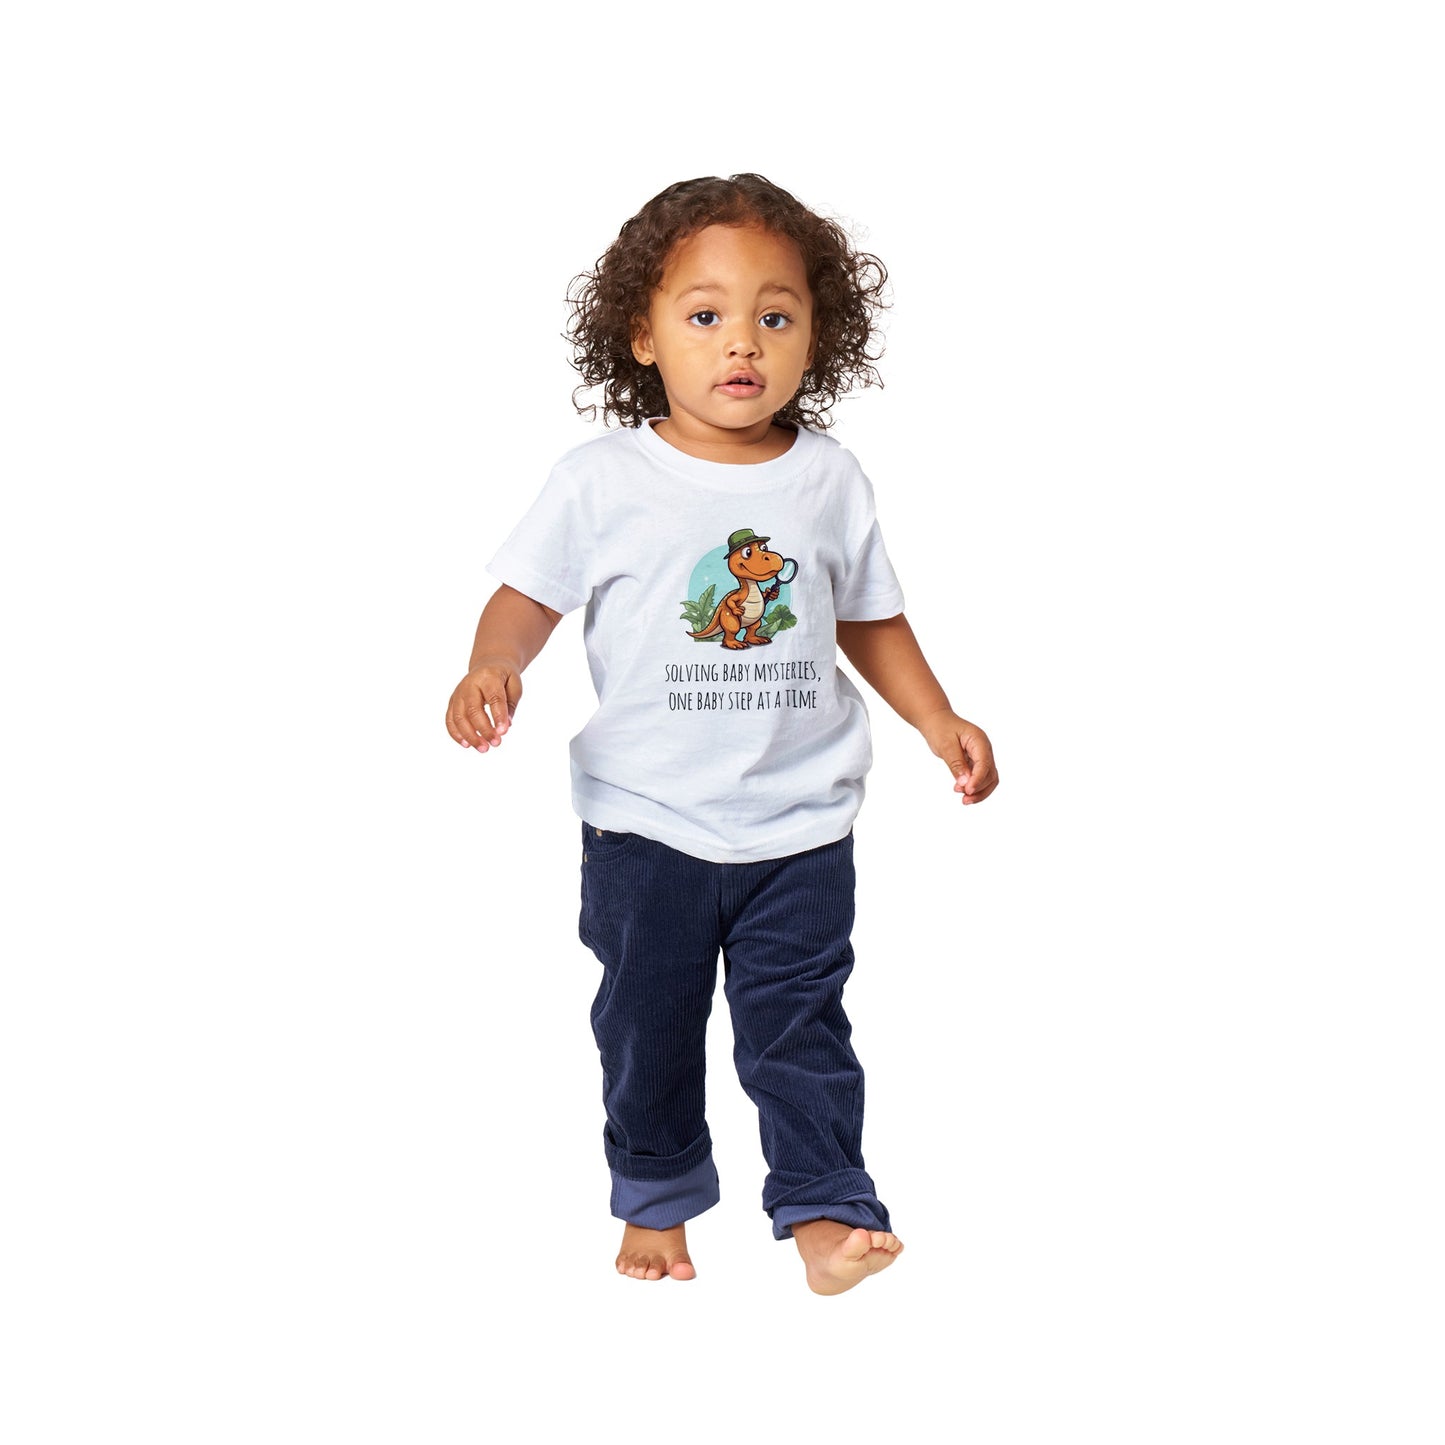 Classic Baby Crewneck T-shirt - Solving Baby Mysteries, One Baby Step At A Time